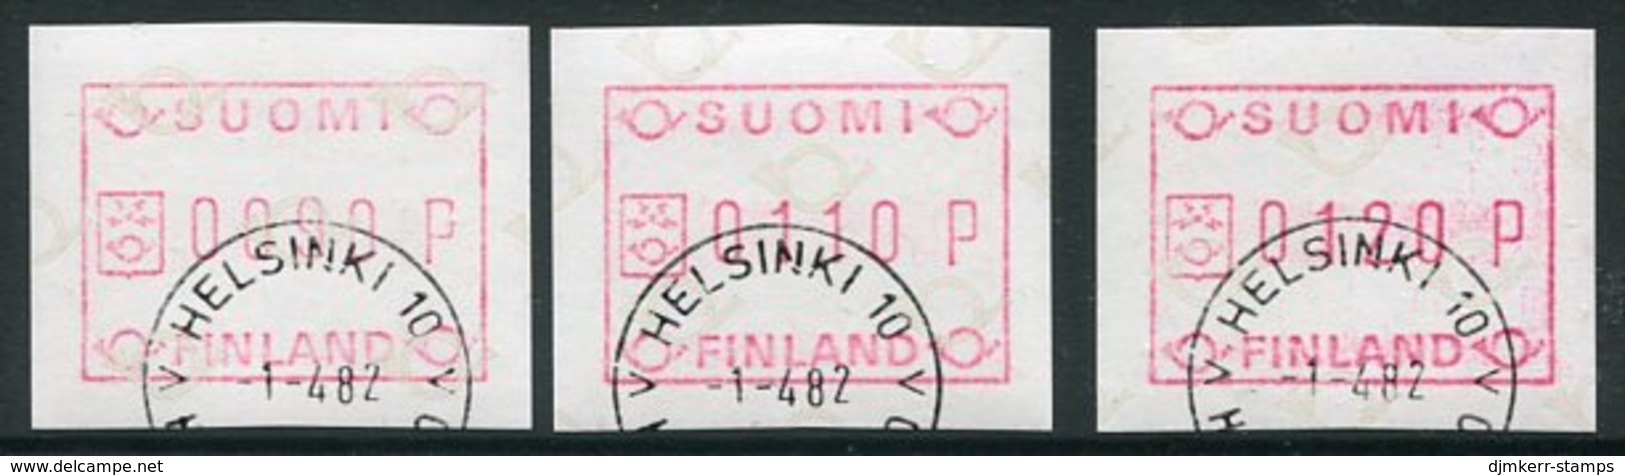 FINLAND 1982 Definitive  ATM, Three Values Used..  Michel 1 - Machine Labels [ATM]